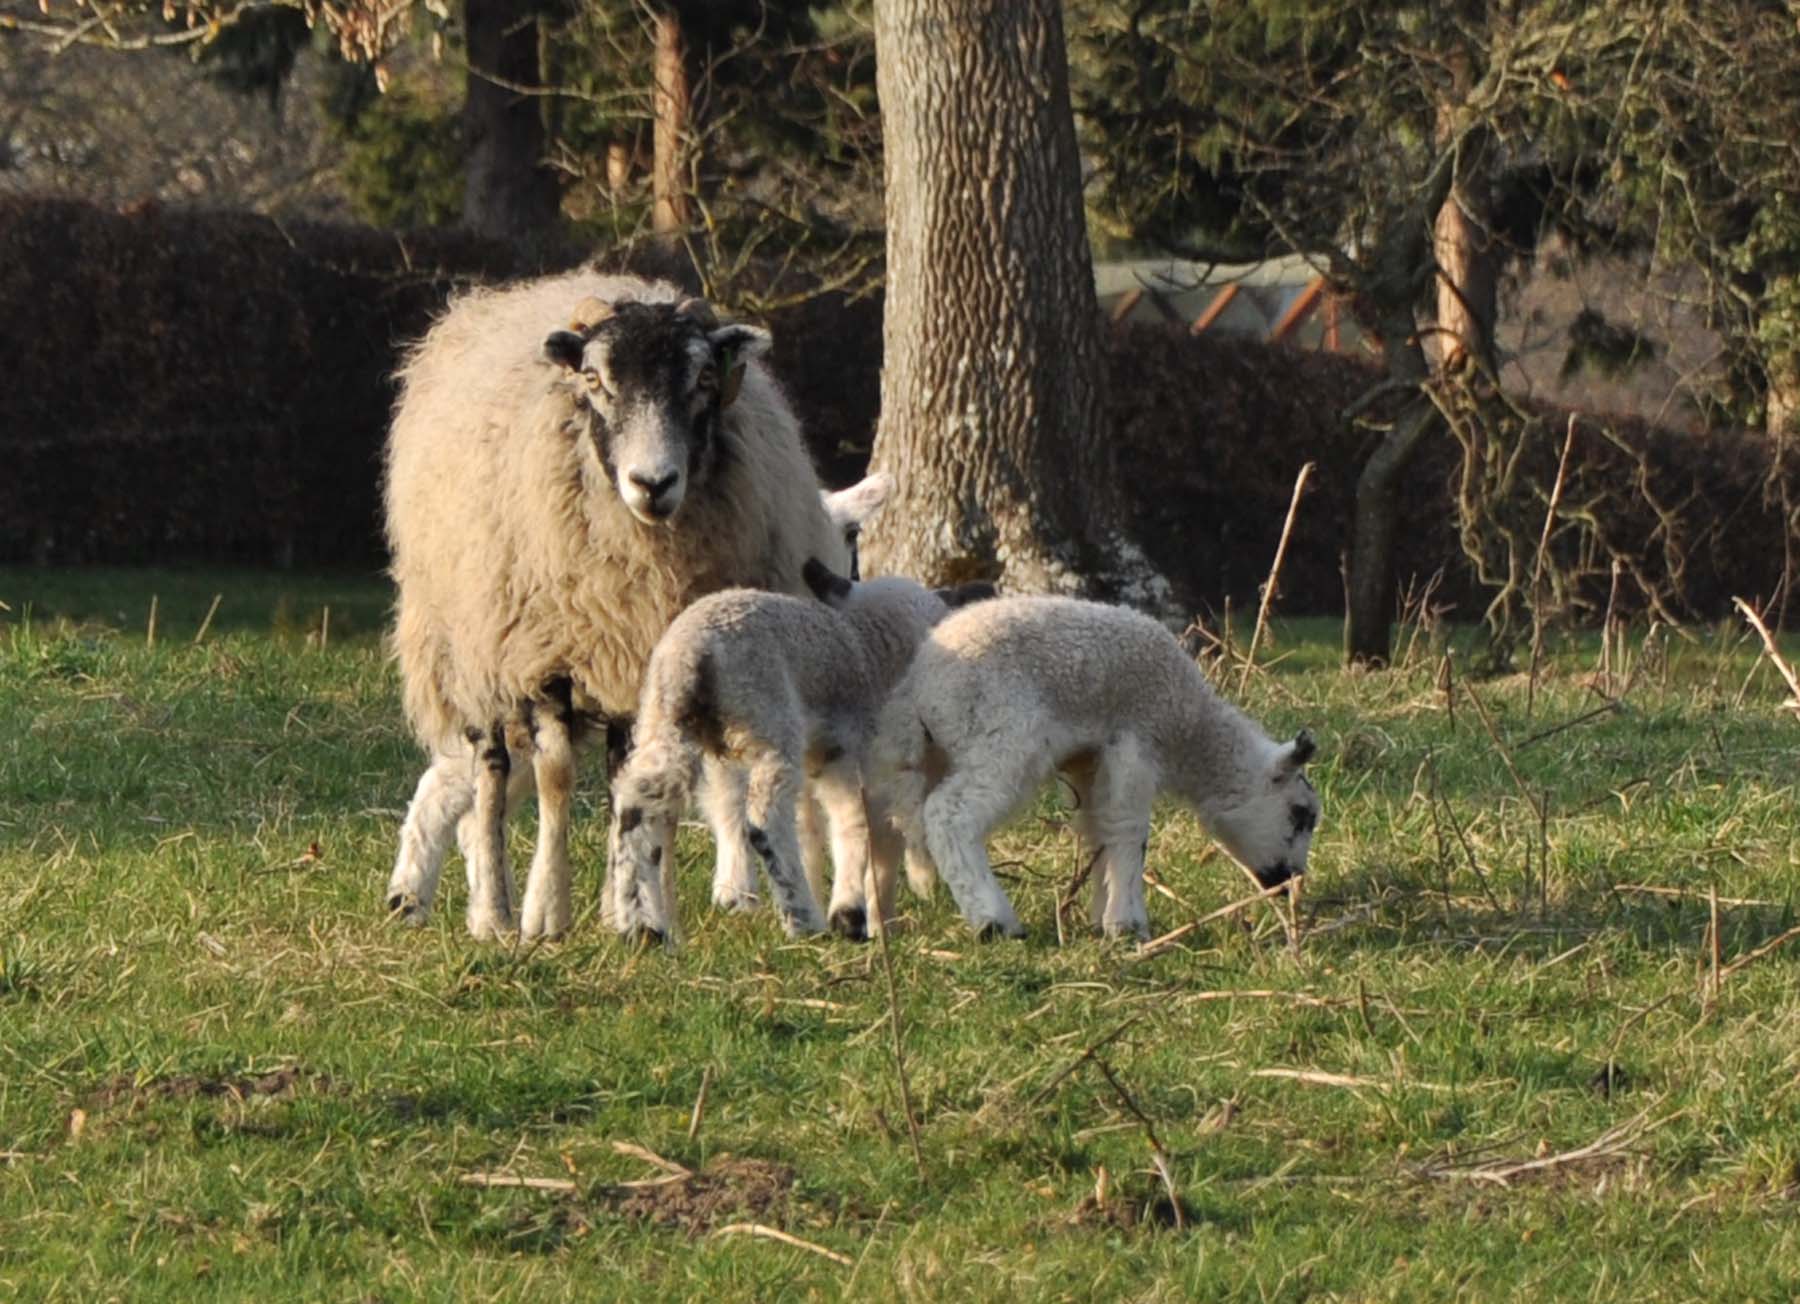 several sheep and two lambs are standing near some trees